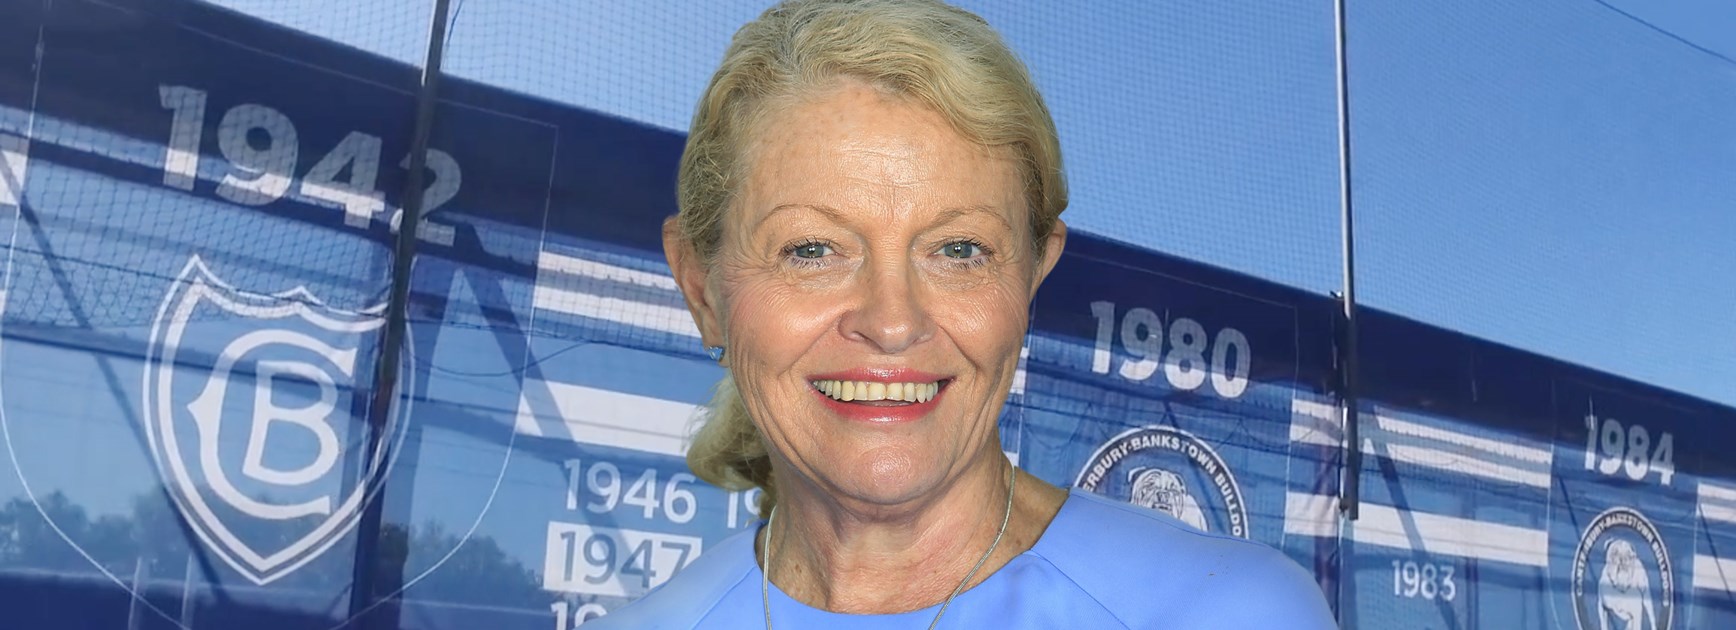 'Cease the negativity': Lynne Anderson resigns as Bulldogs chair